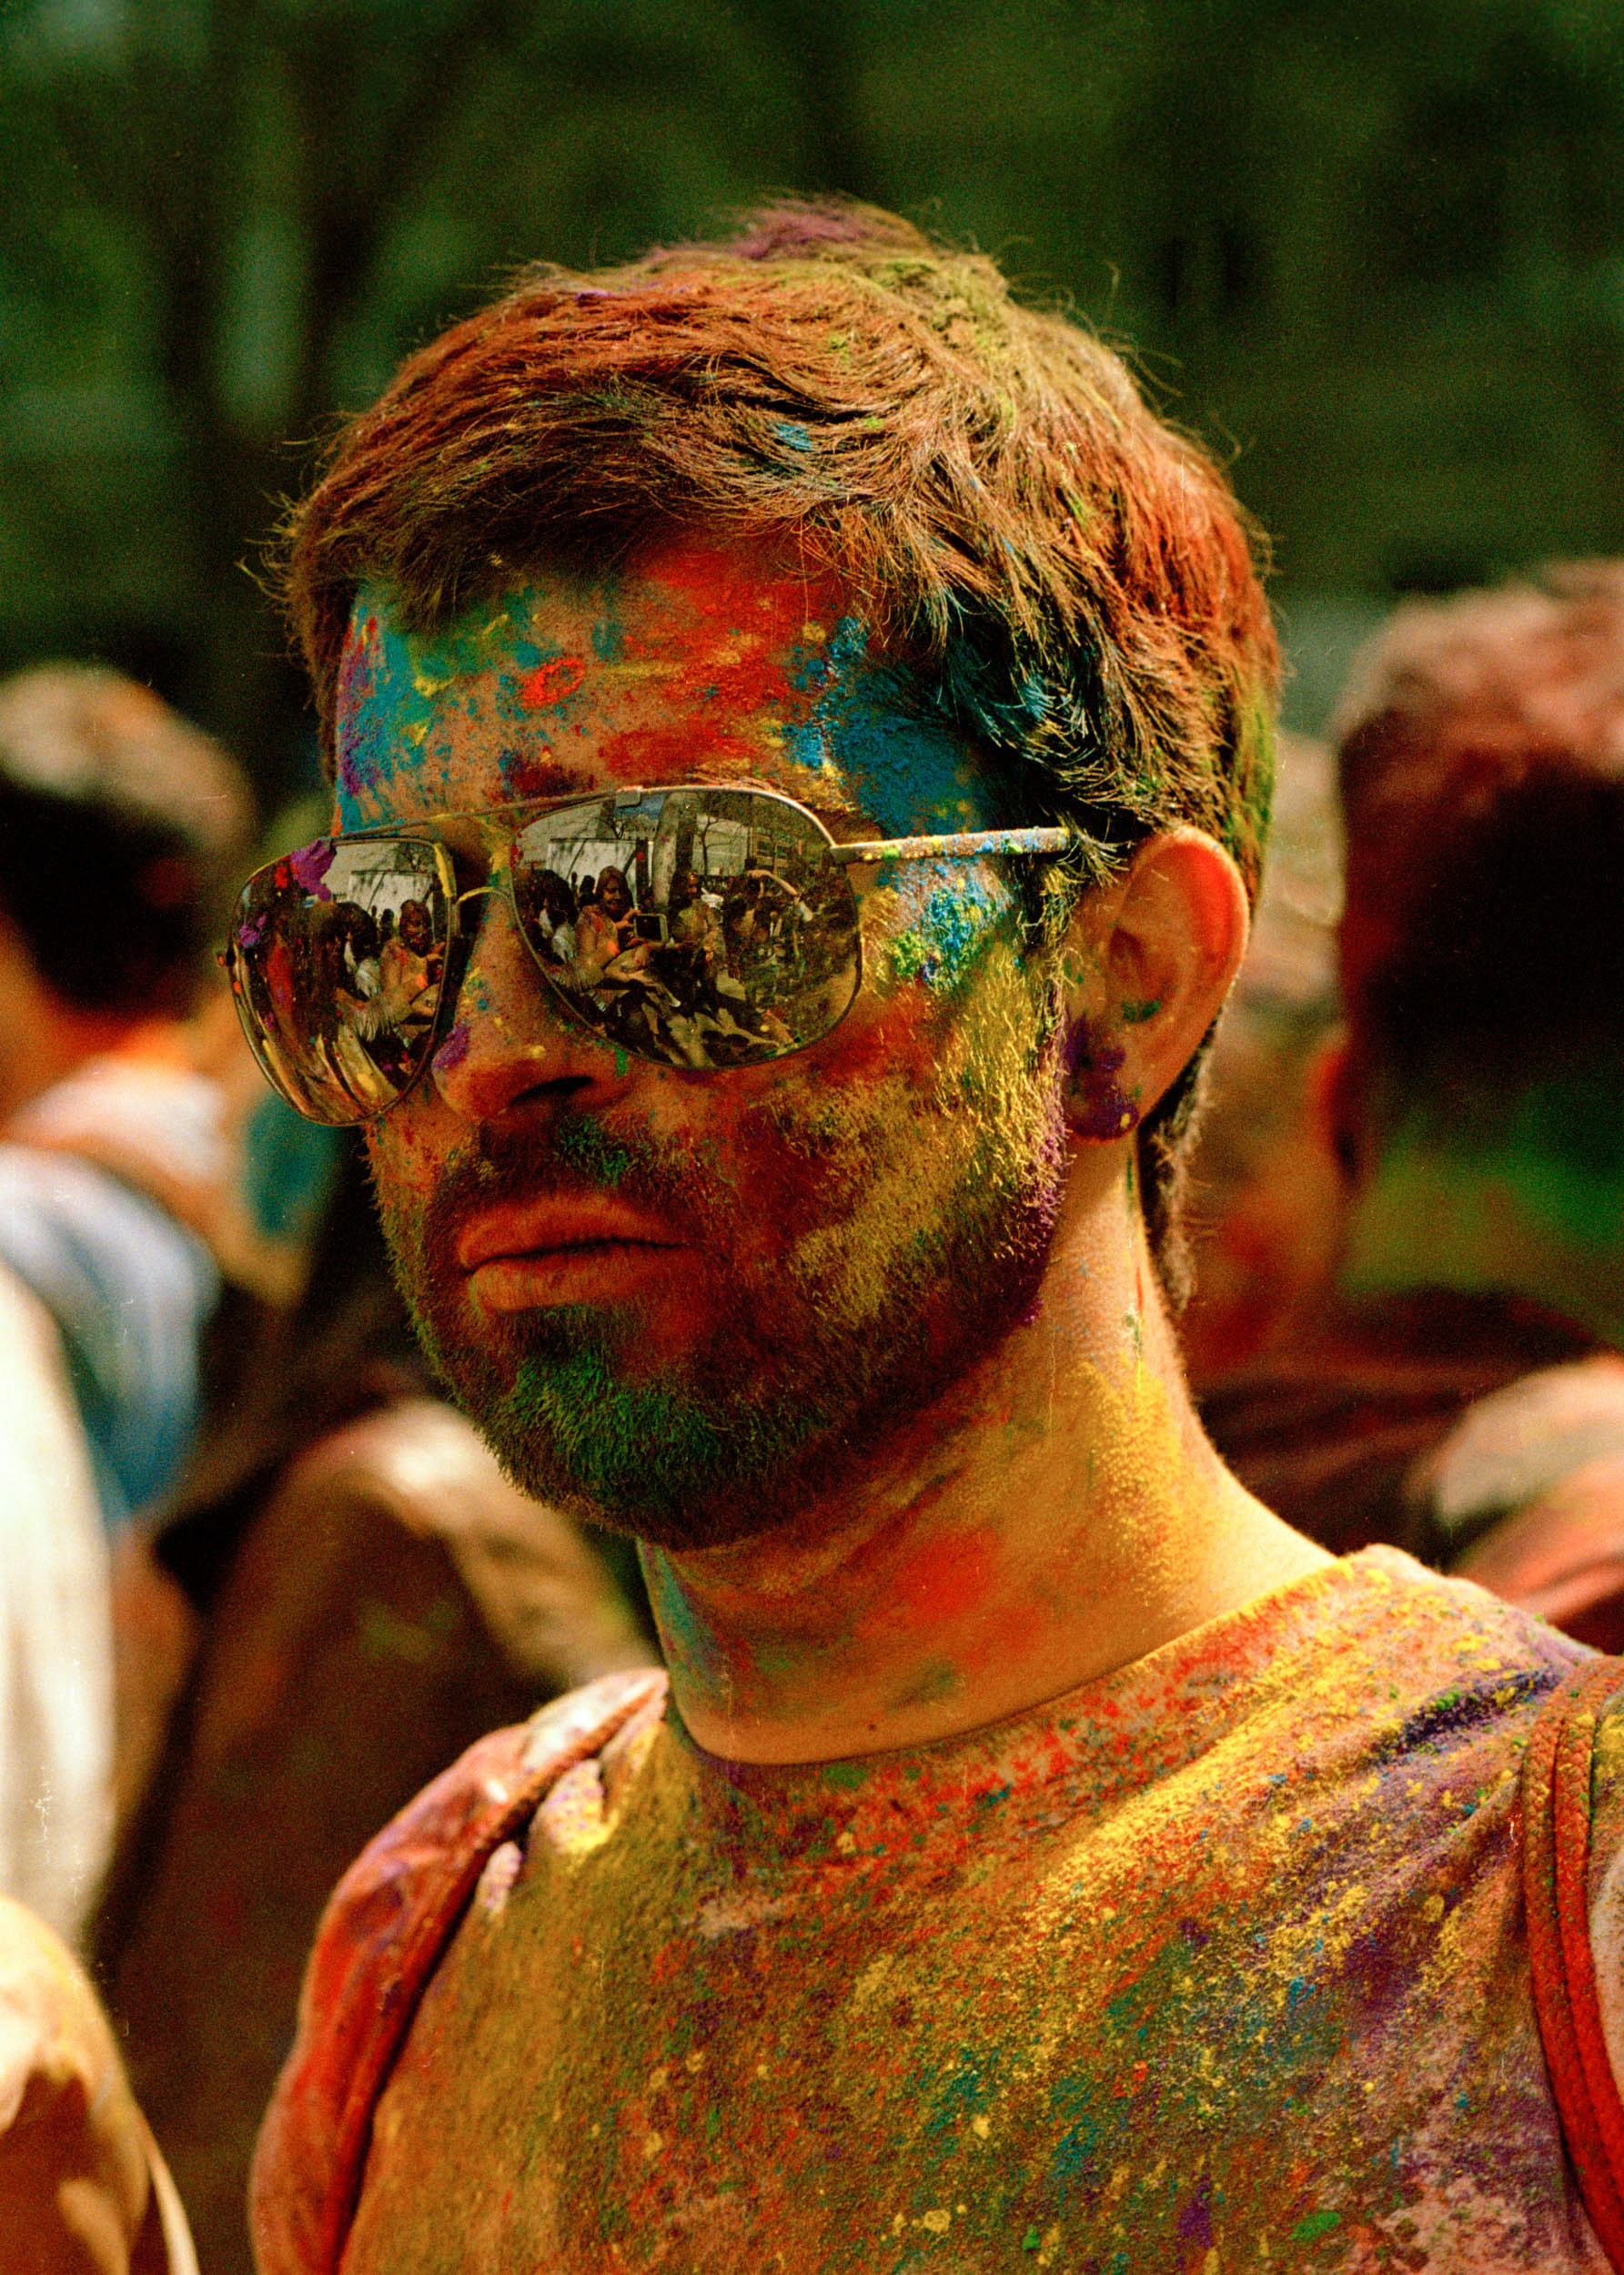 FACE DECORATED WITH COLOR - HOLI FESTIVAL